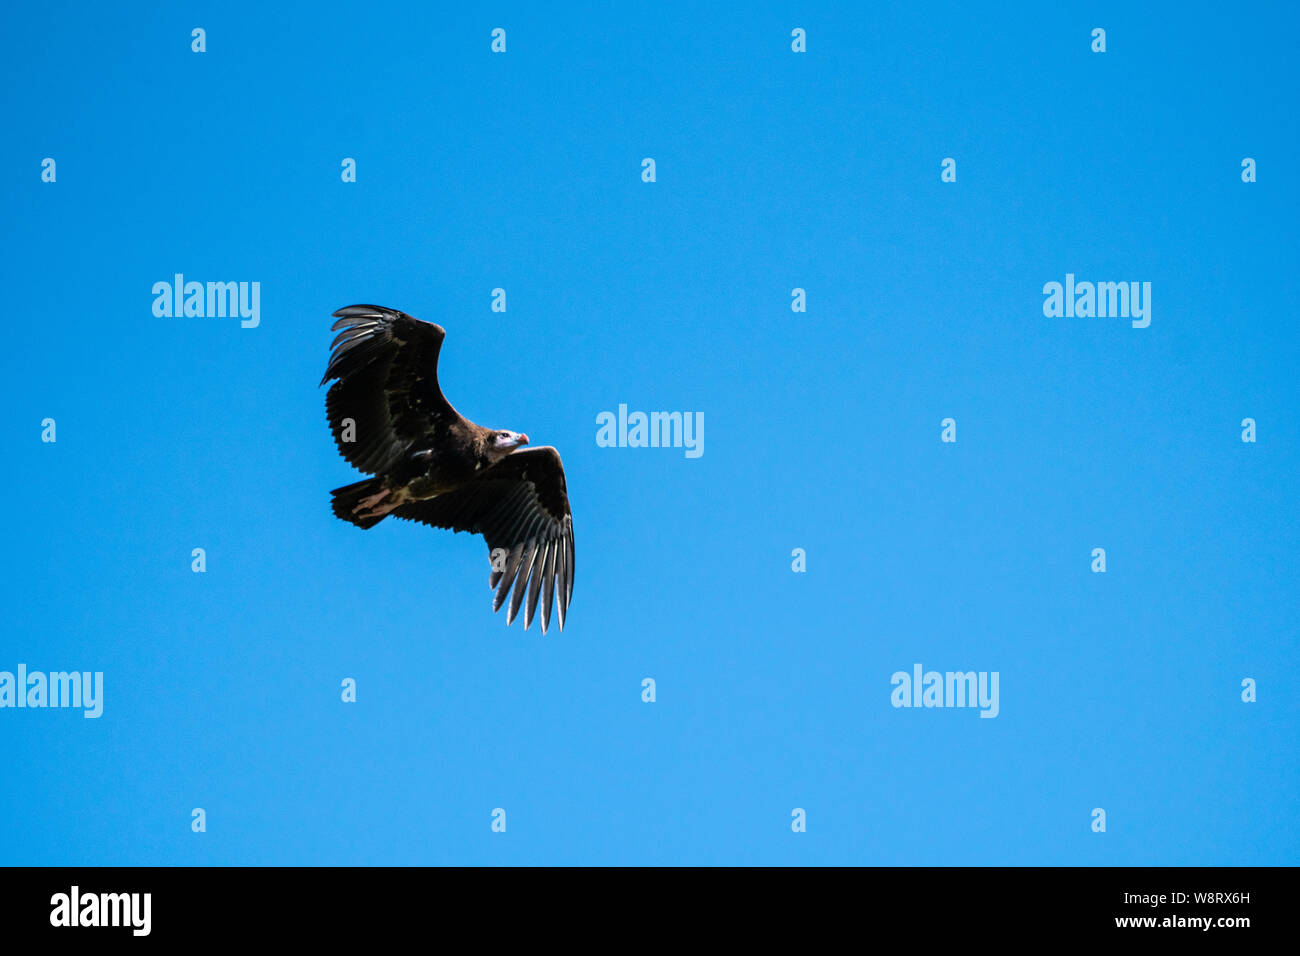 White-headed vulture (Trigonoceps occipitalis) Critically endangered bird species endemic to Africa. In flight with a blue sky background. Photographe Stock Photo